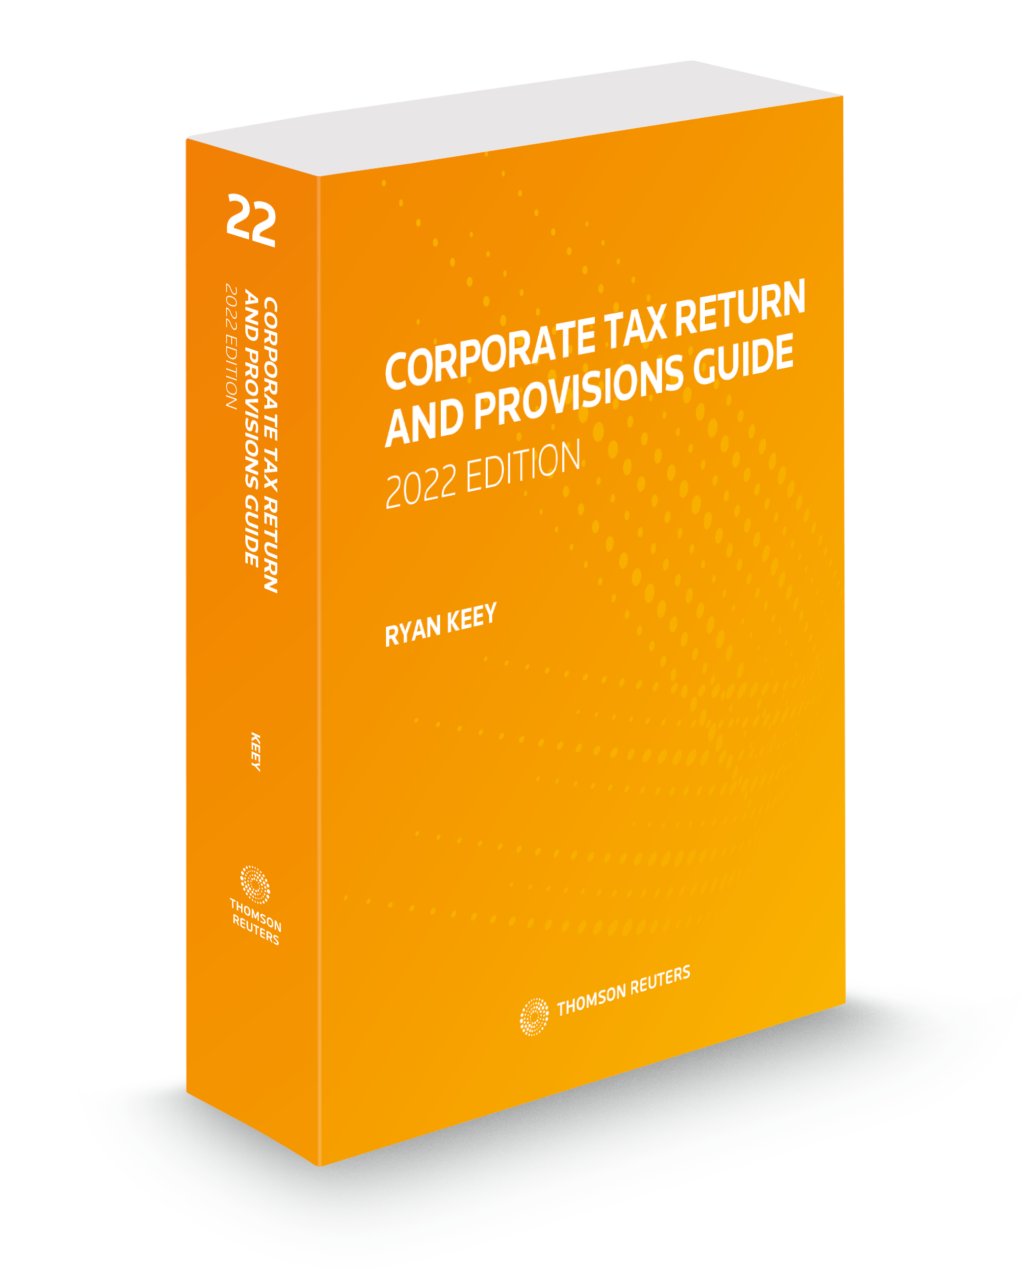 corporate-tax-return-and-provisions-guide-2022-edition-softbound-book